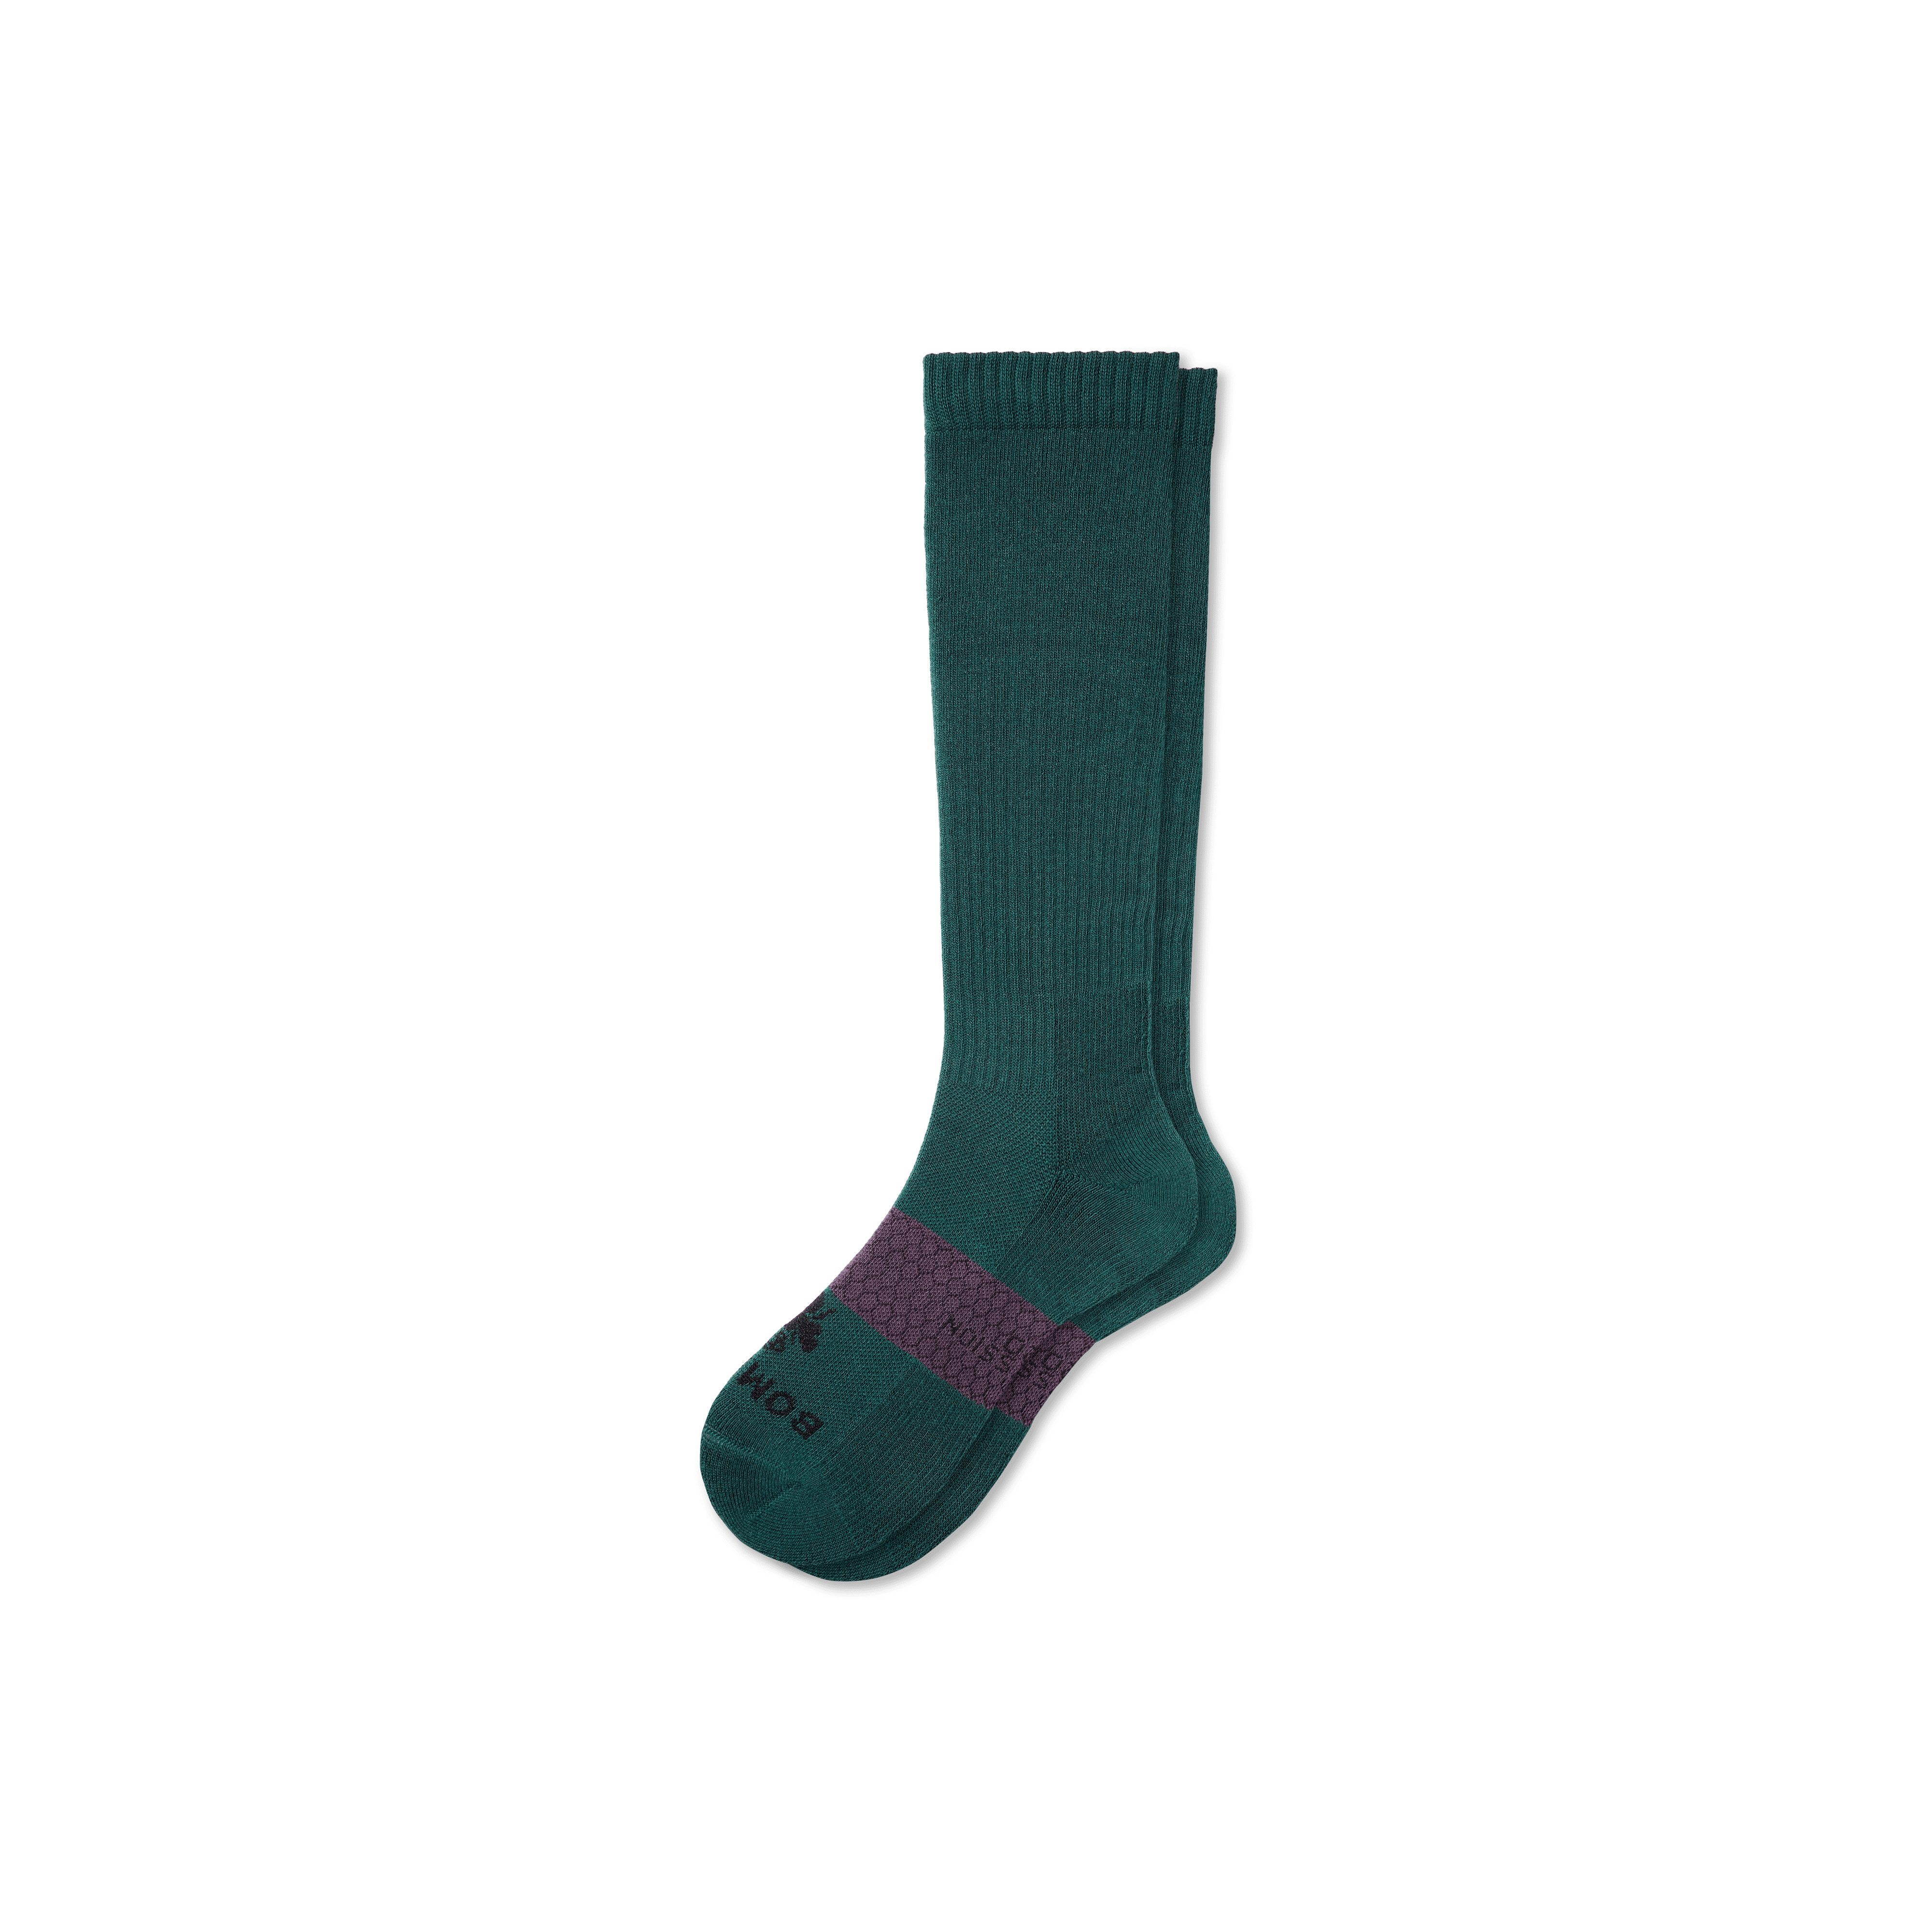 Bombas Everyday Compression Socks (15-20mmhg) In Midnight Teal